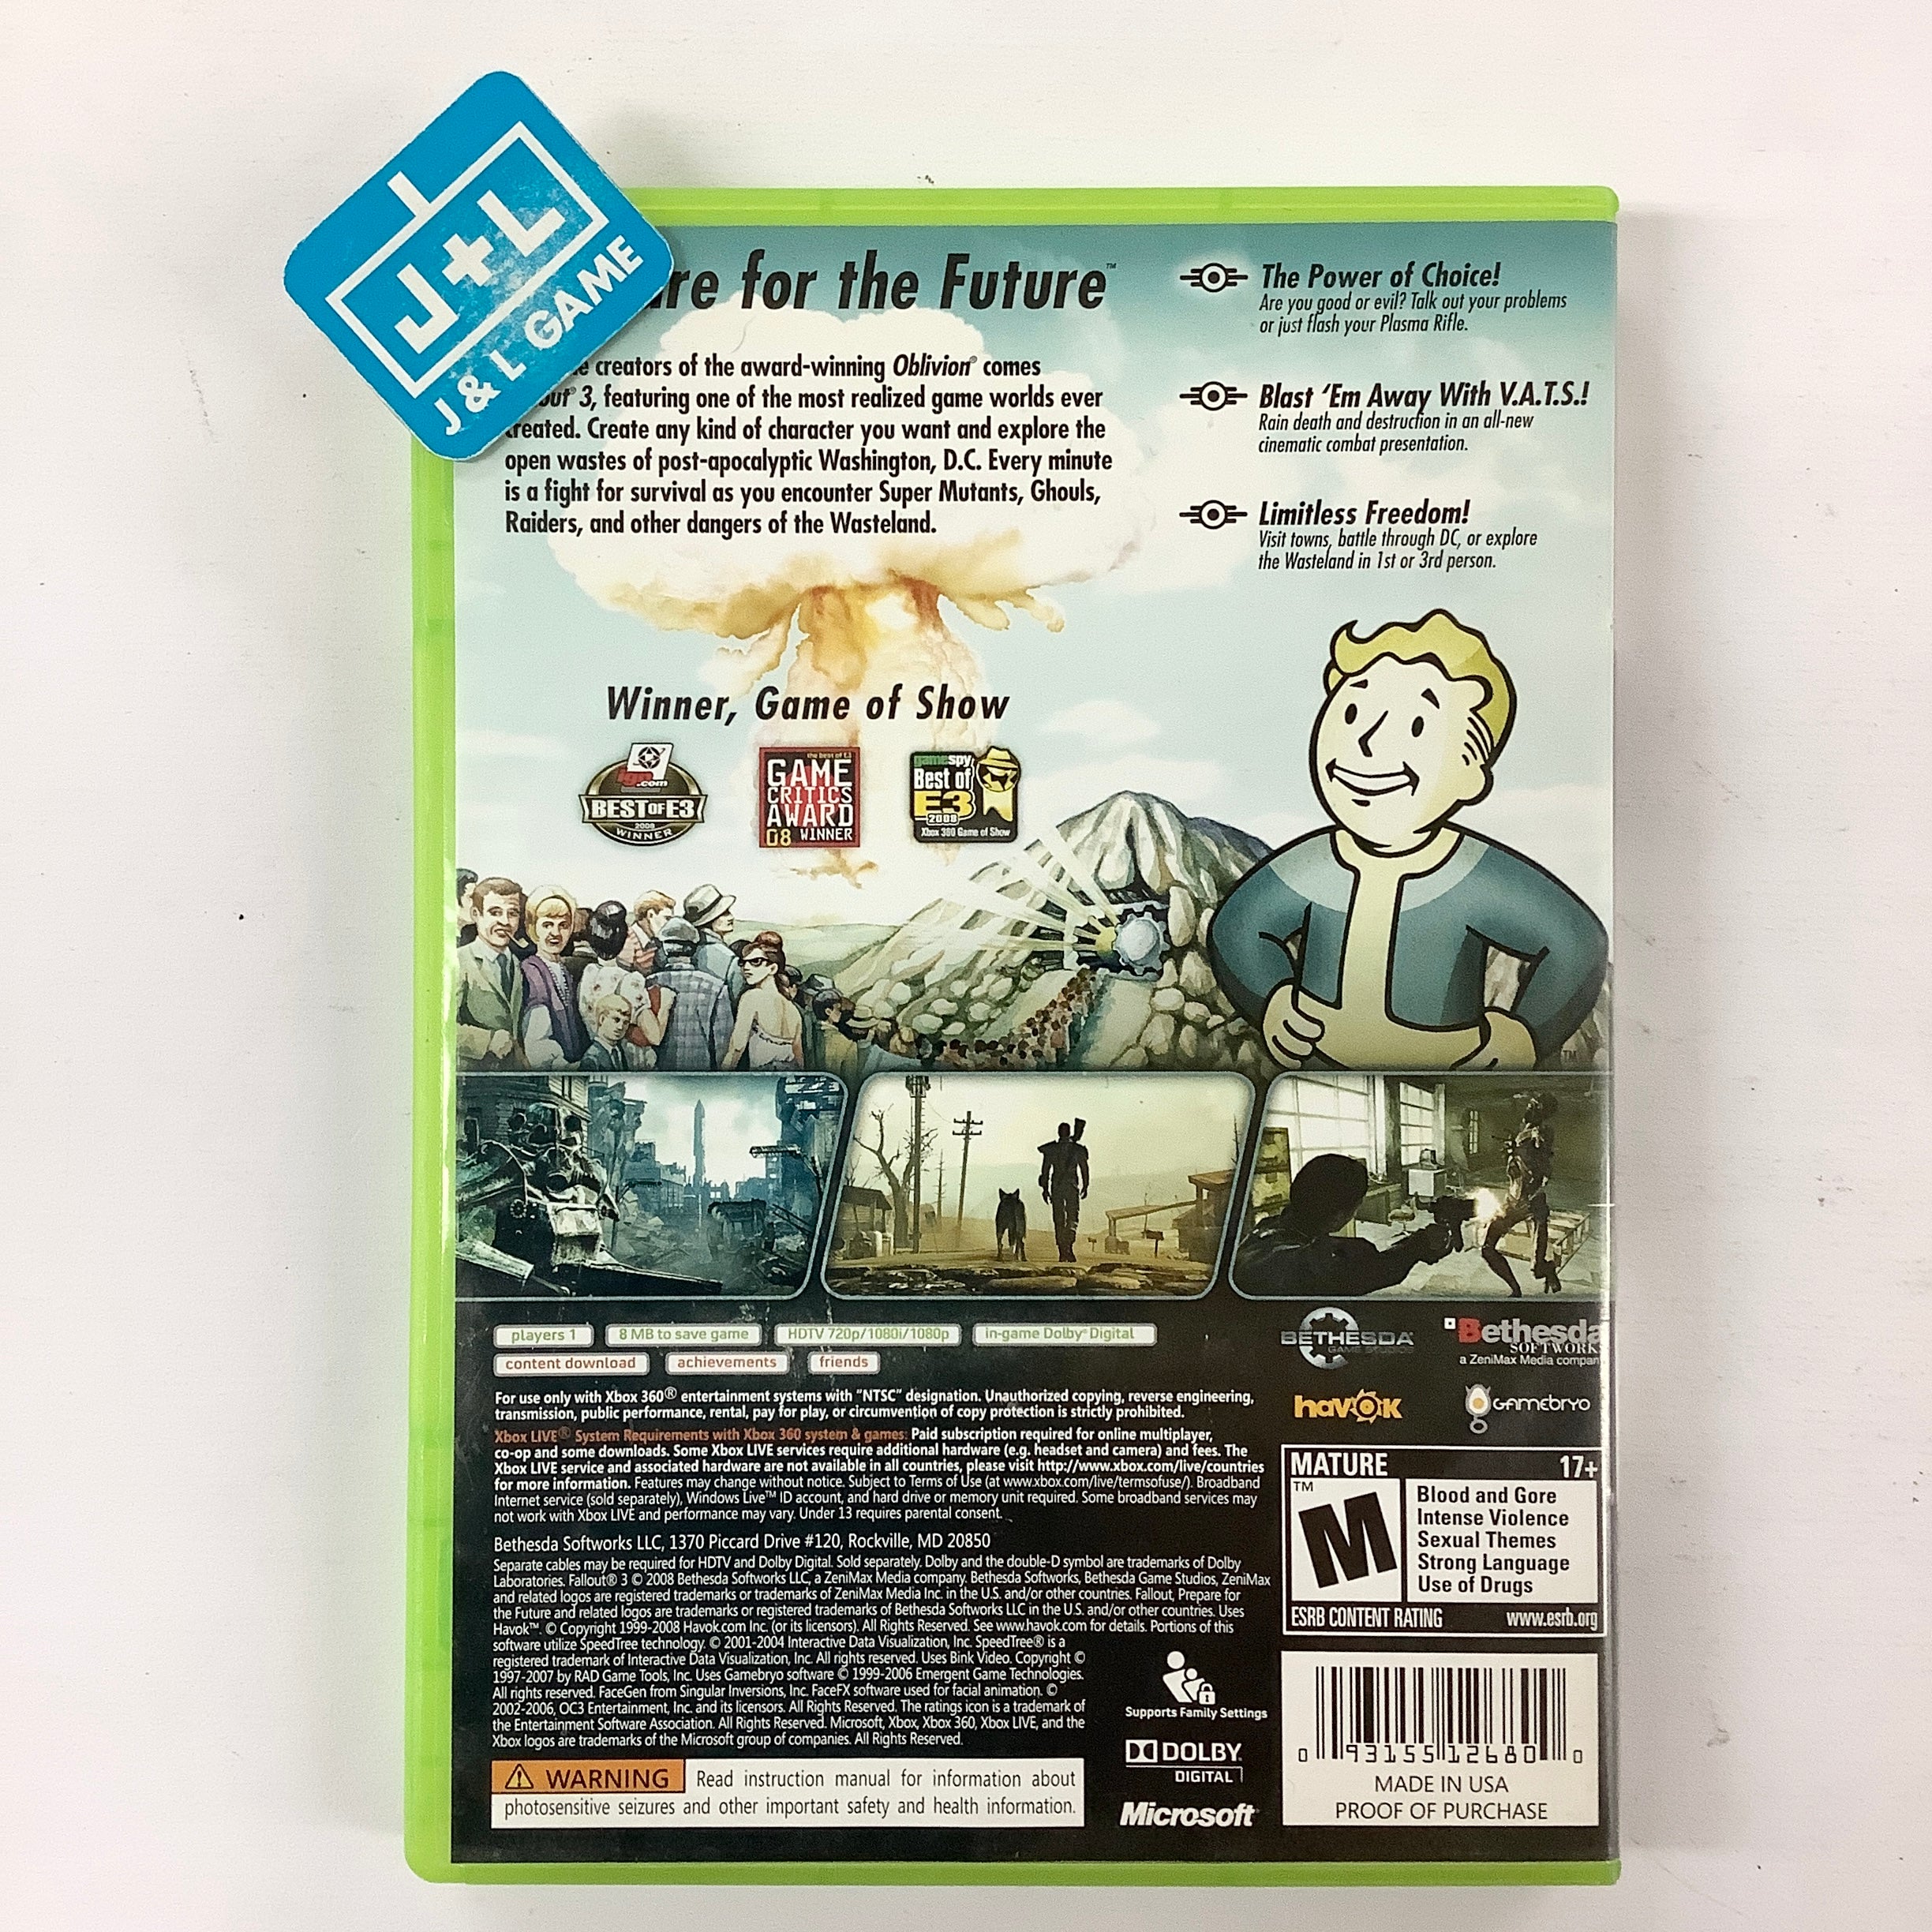 Fallout 3 - Xbox 360 [Pre-Owned] Video Games Bethesda Softworks   